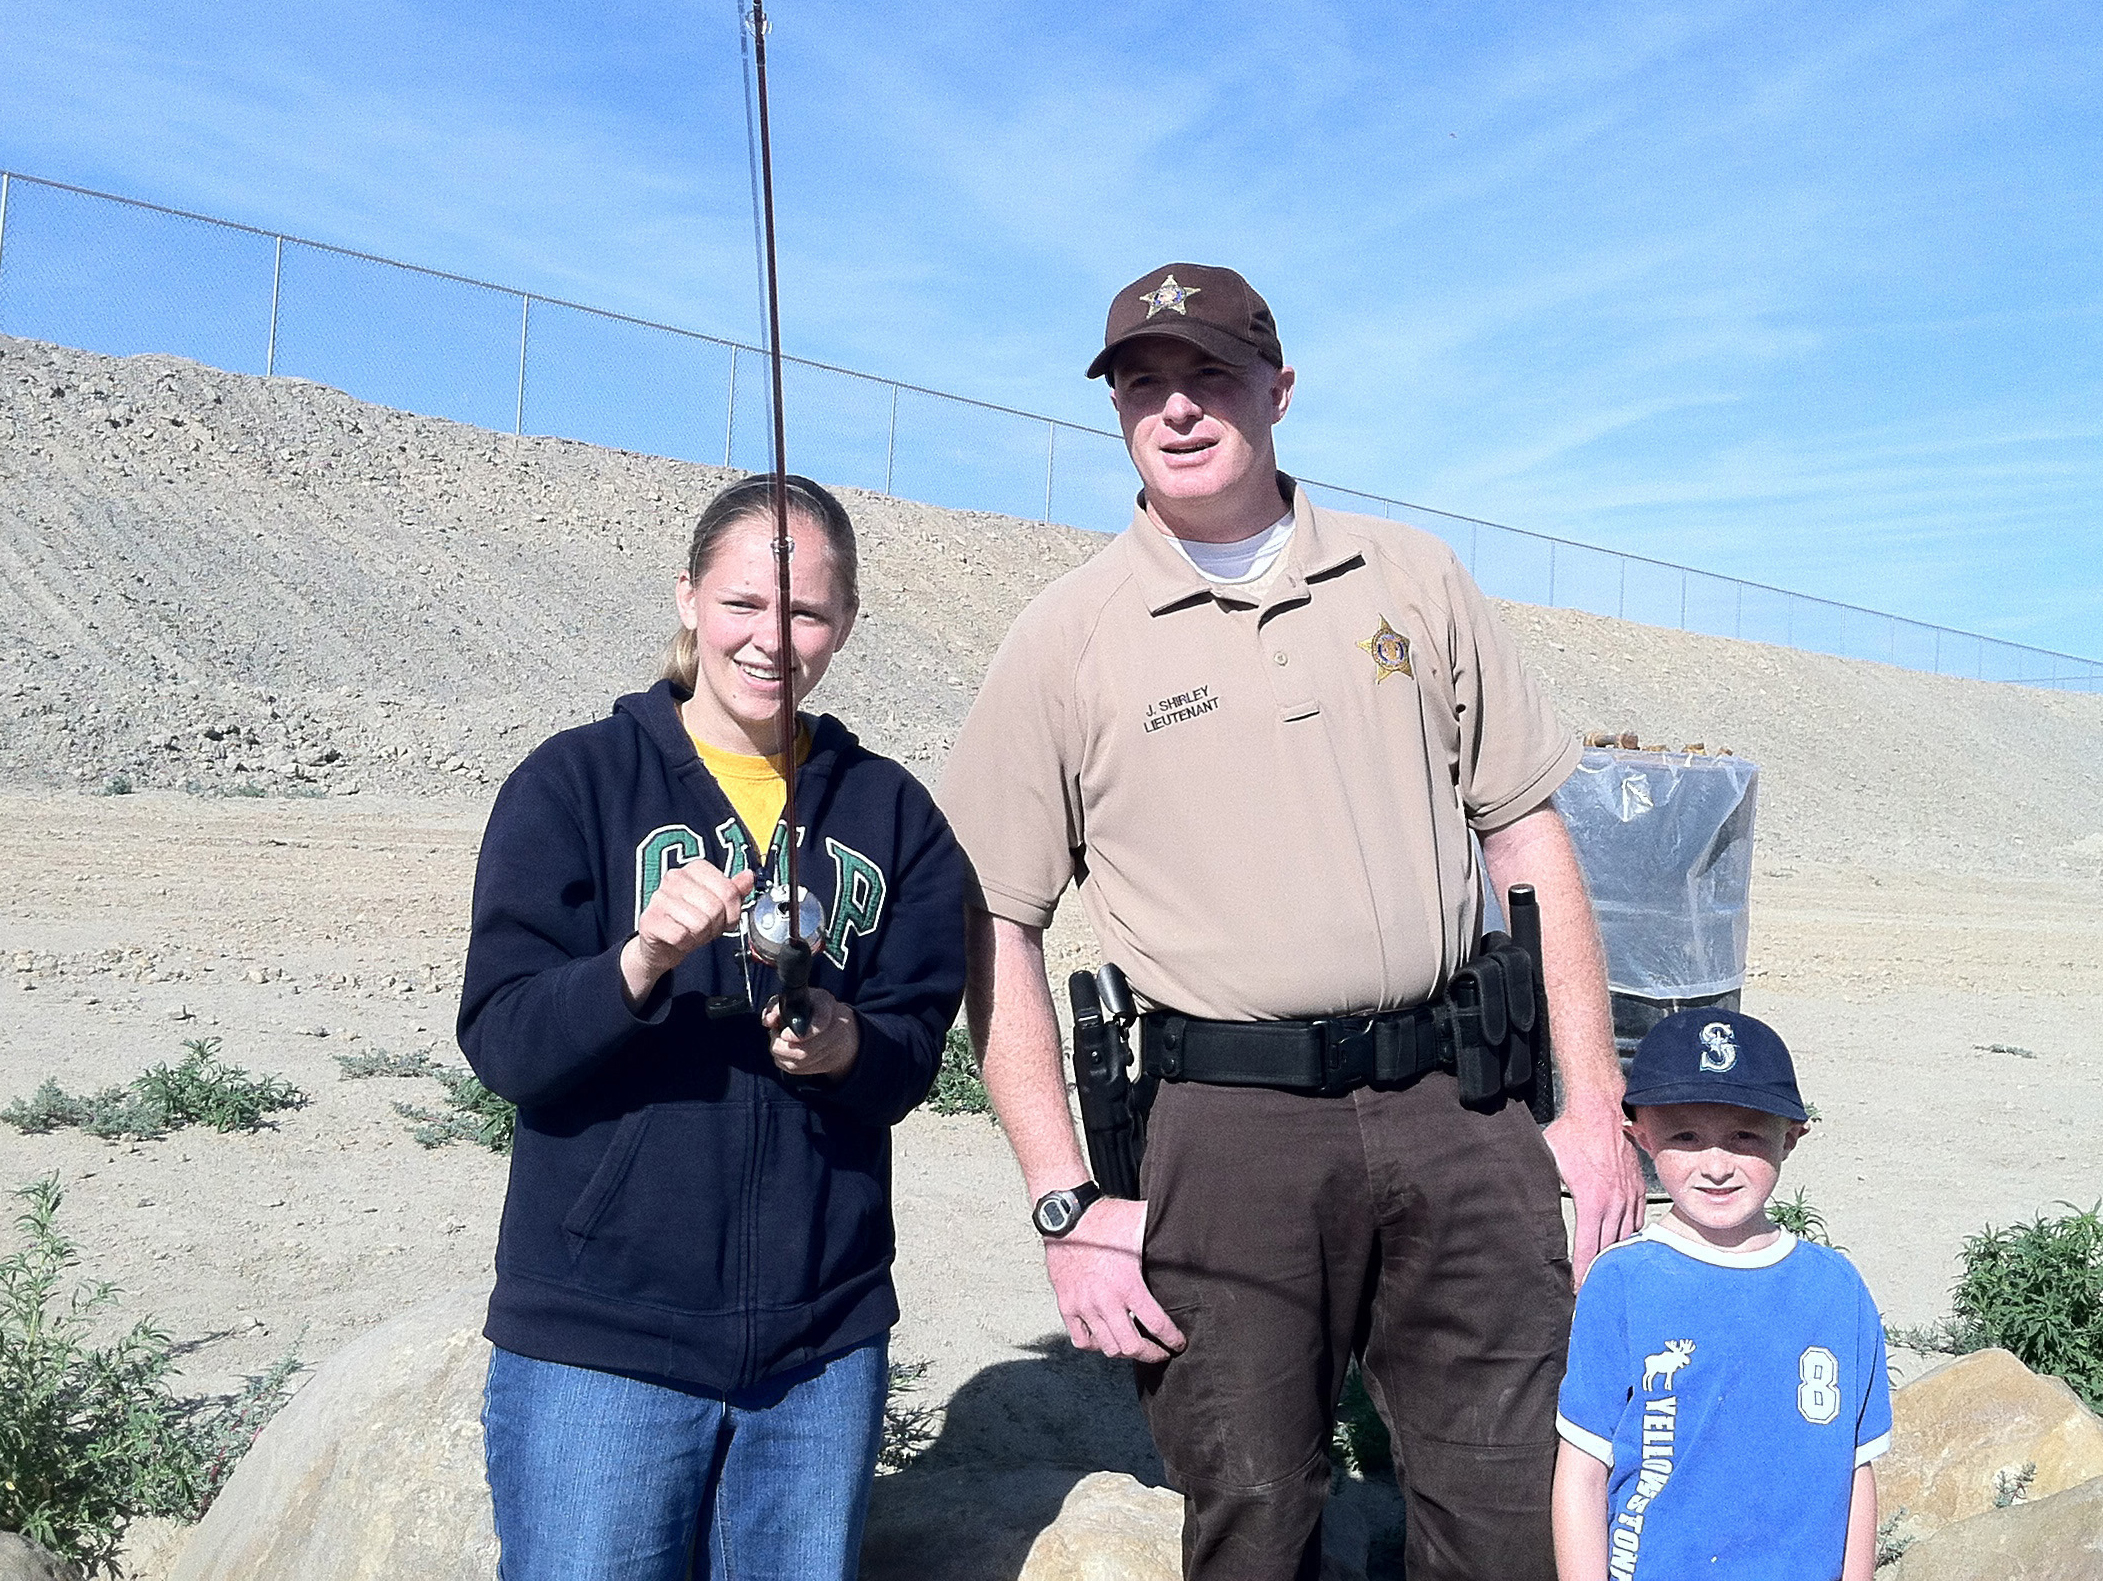 Conservation officers with the Division of Wildlife Resources are among those who will help you catch fish at the Cops, Bobbers and Badges event.